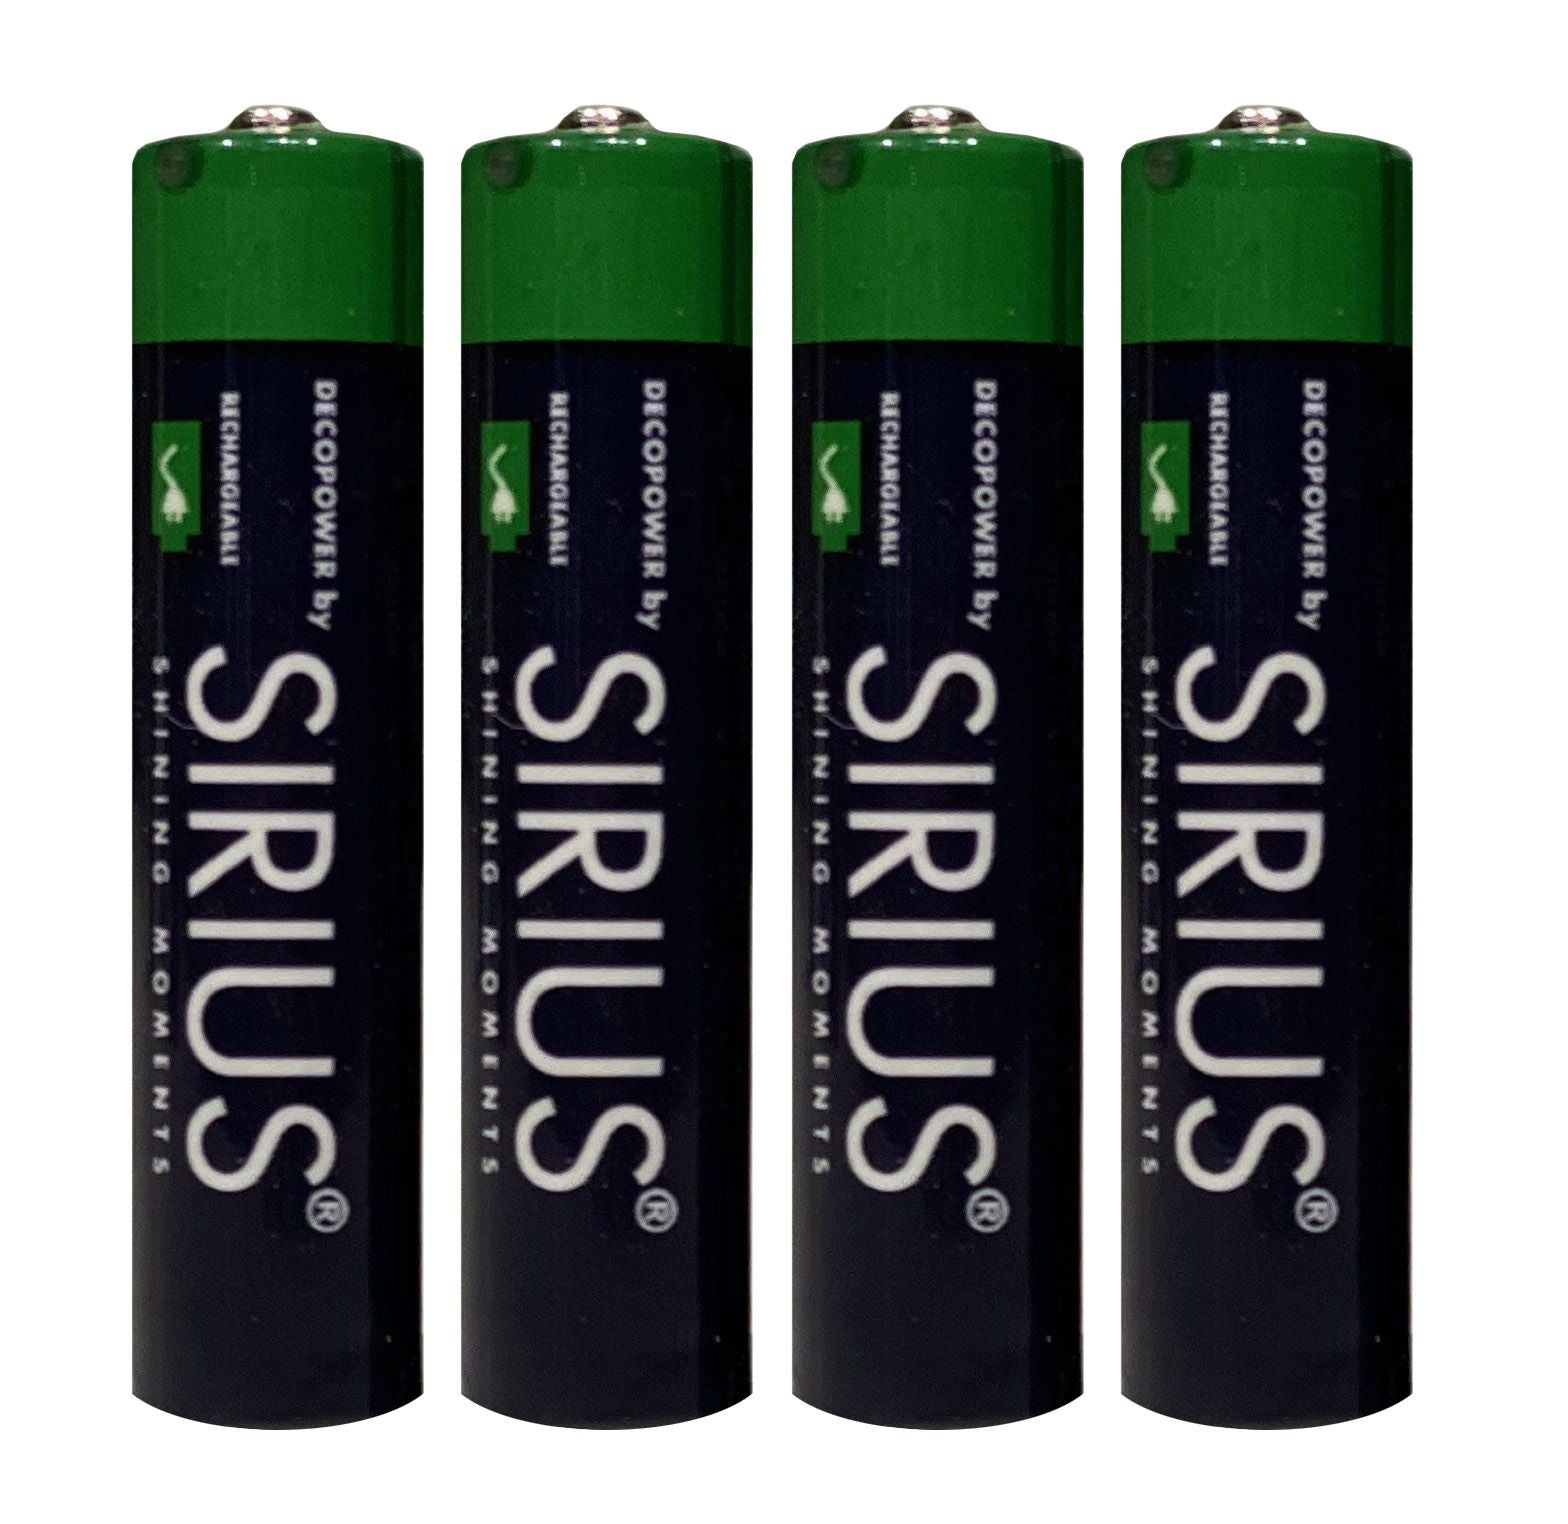 Sirius Deco Power AAA Batteries rechargeables, 4 PCS Set